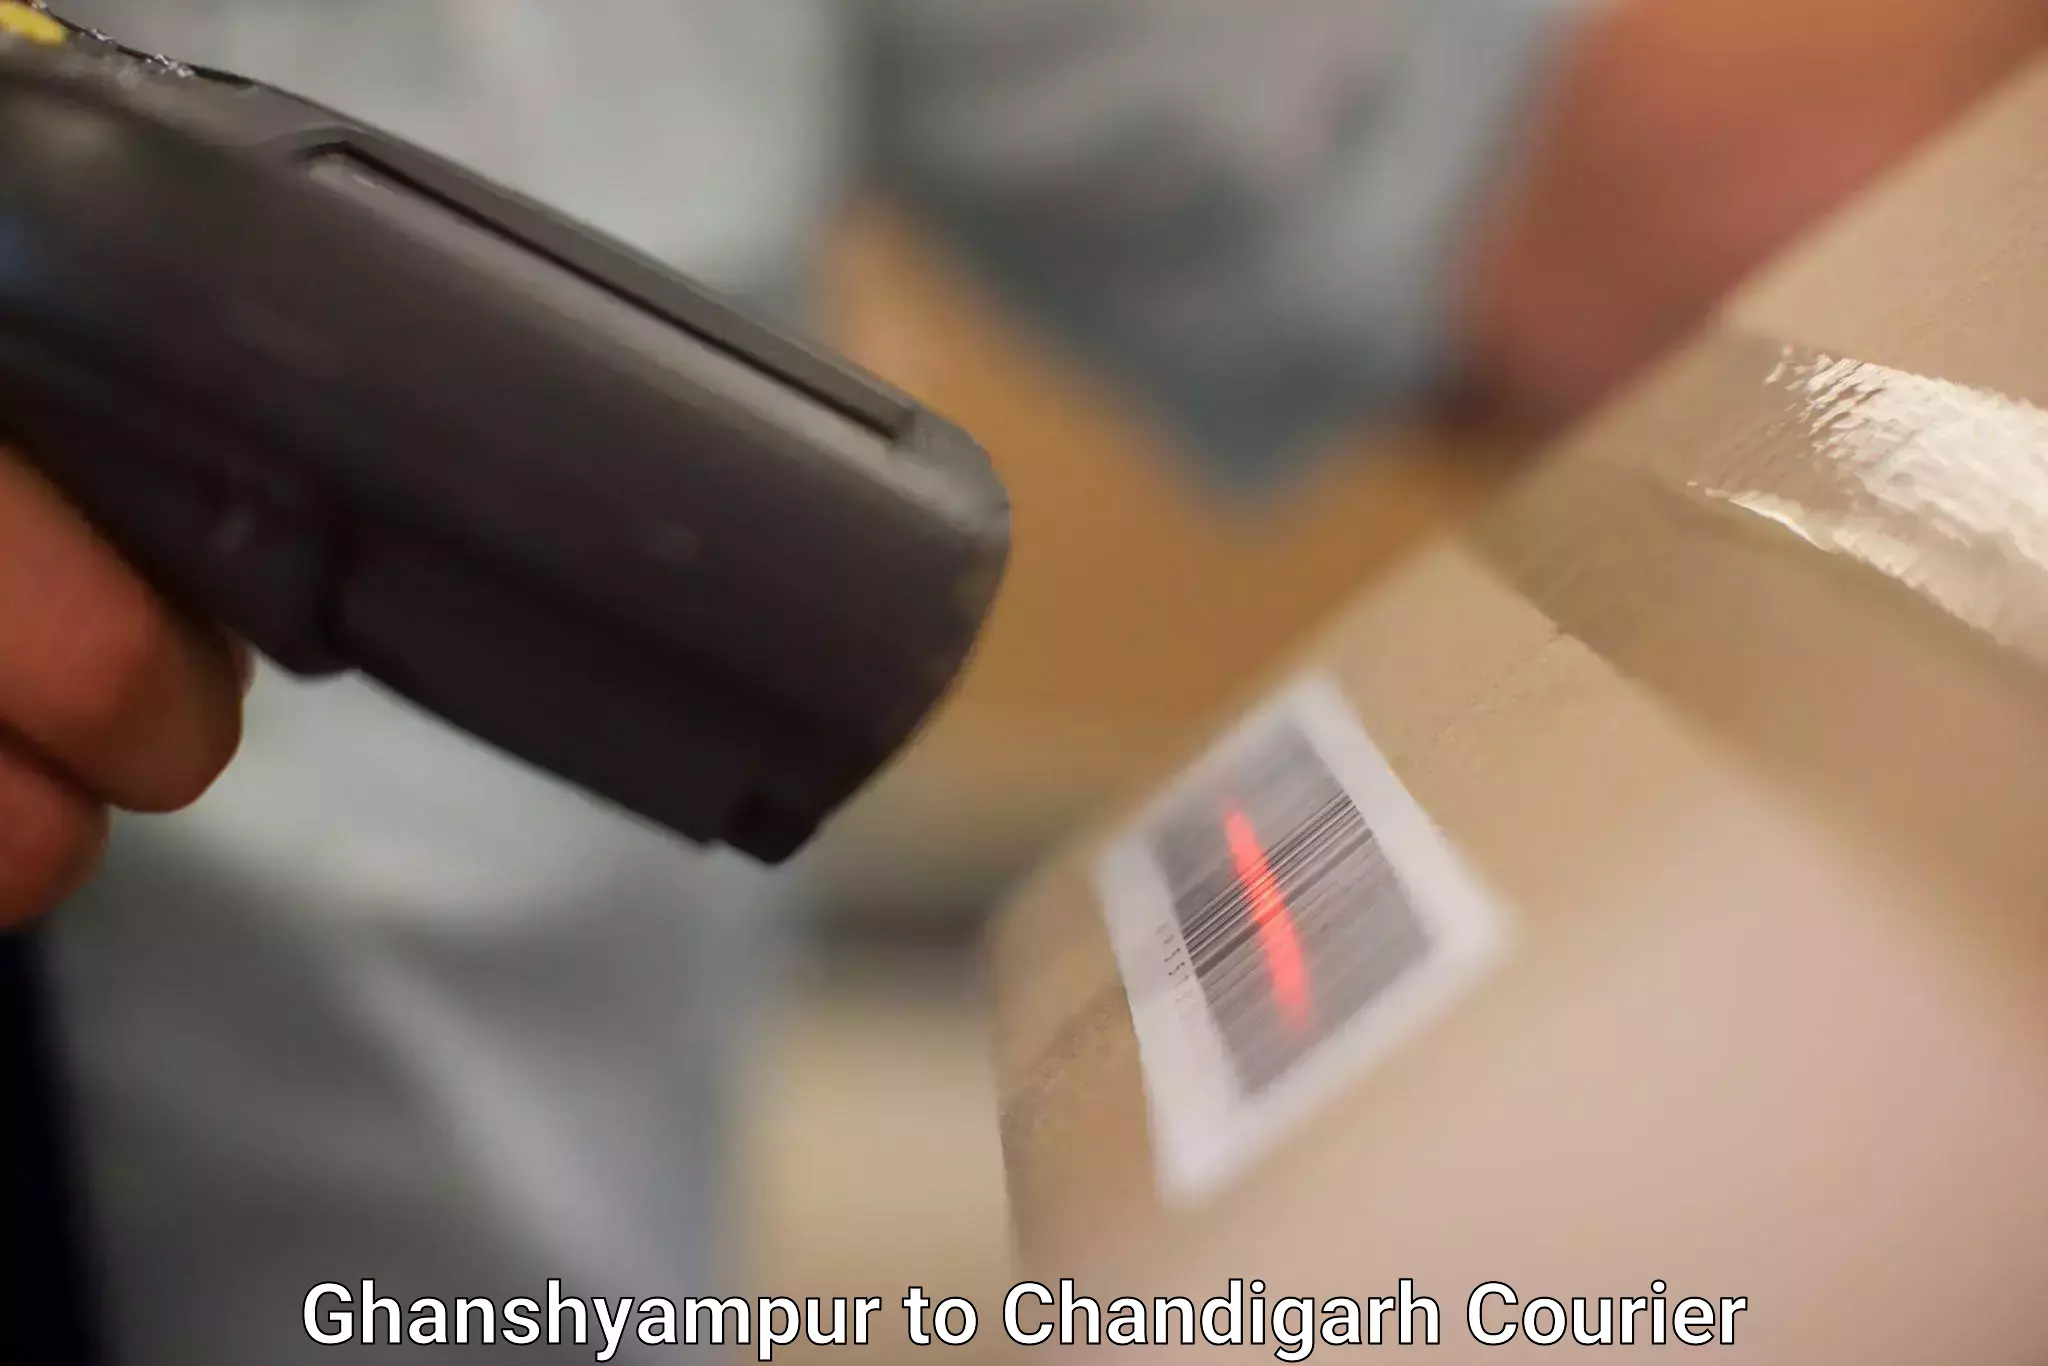 24/7 courier service Ghanshyampur to Panjab University Chandigarh